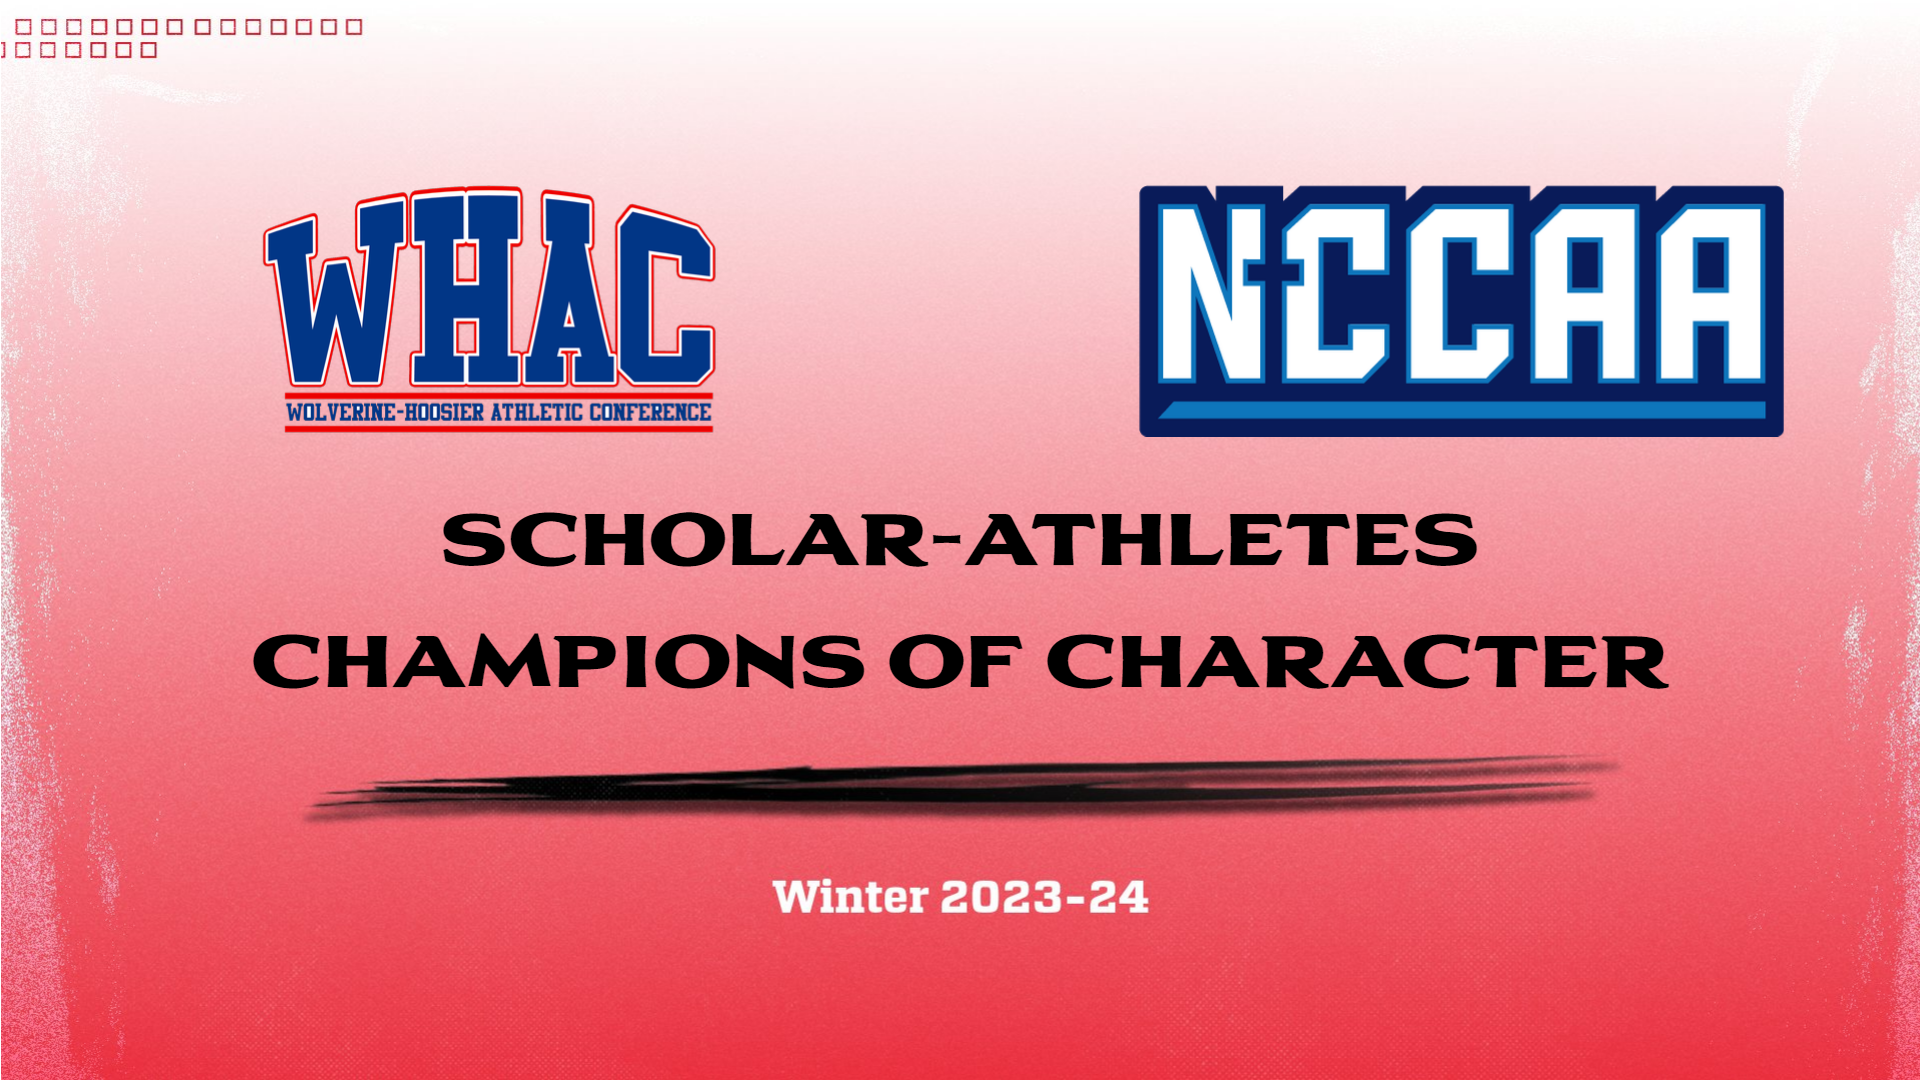 Winter Champions of Character and Scholar-Athletes Announced